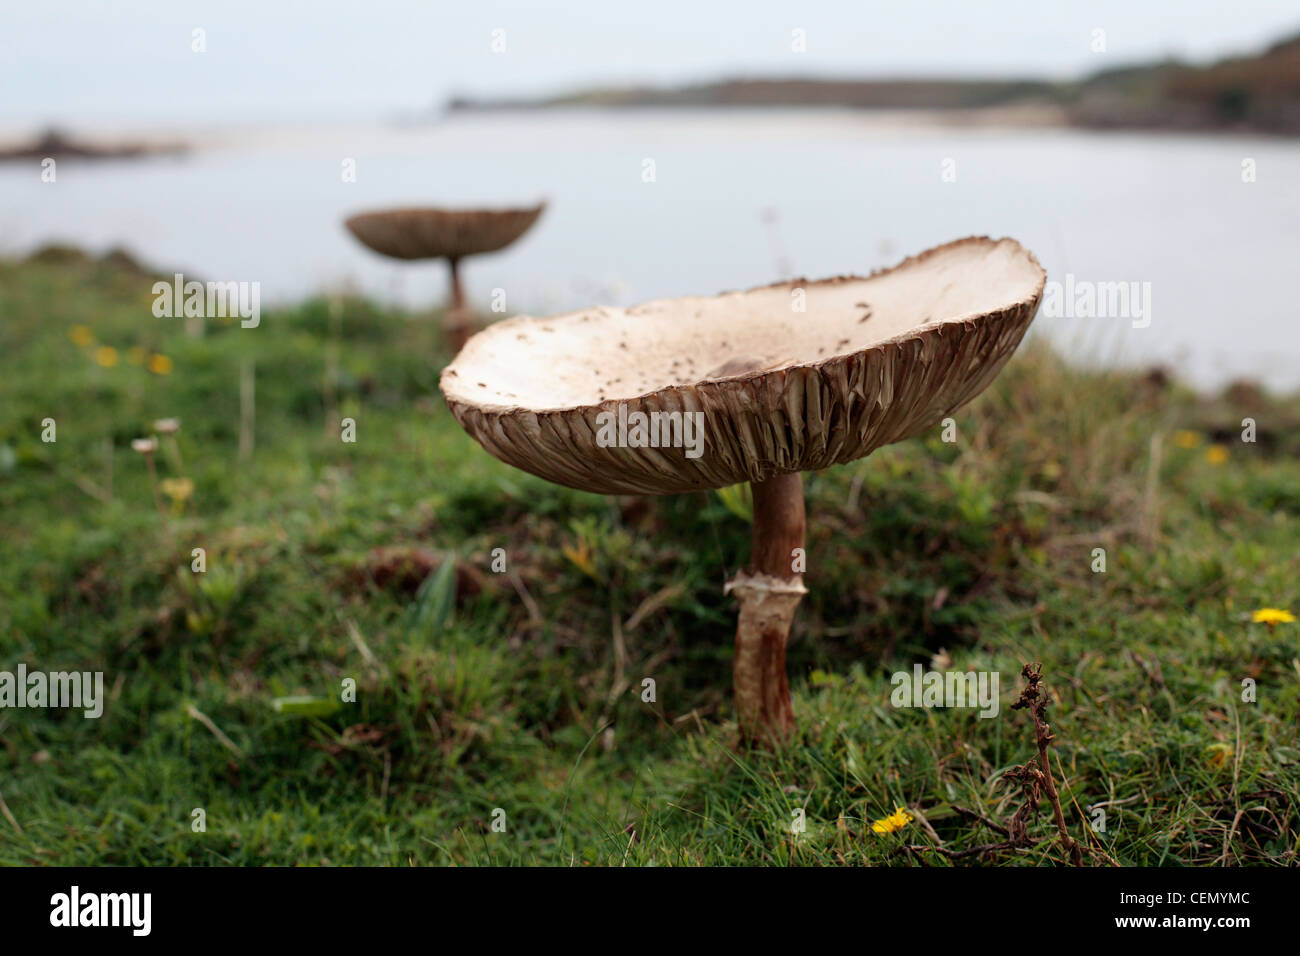 Wild Mushrooms growing on St. Agnes, Scilly Isles, UK. Stock Photo